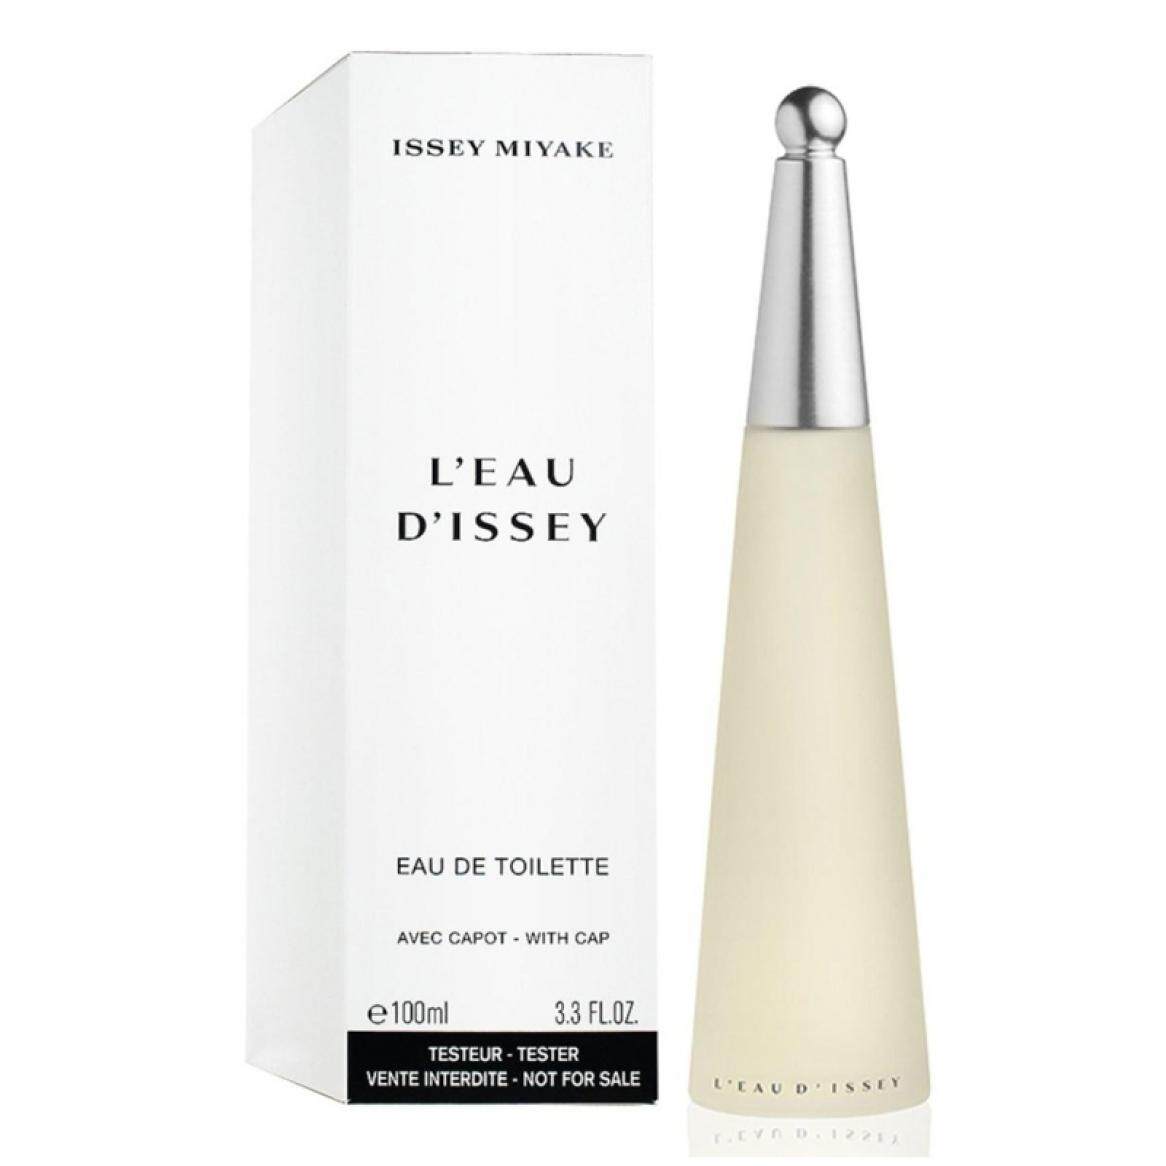 Issey miyake духи. Issey Miyake l'Eau d'Issey 100 ml. Issey Miyake l`Eau d`Issey 100 мл. Issey Miyake l'Eau d'Issey pour femme 100 ml. Issey Miyake l'Eau d'Issey Lady 100ml EDT.